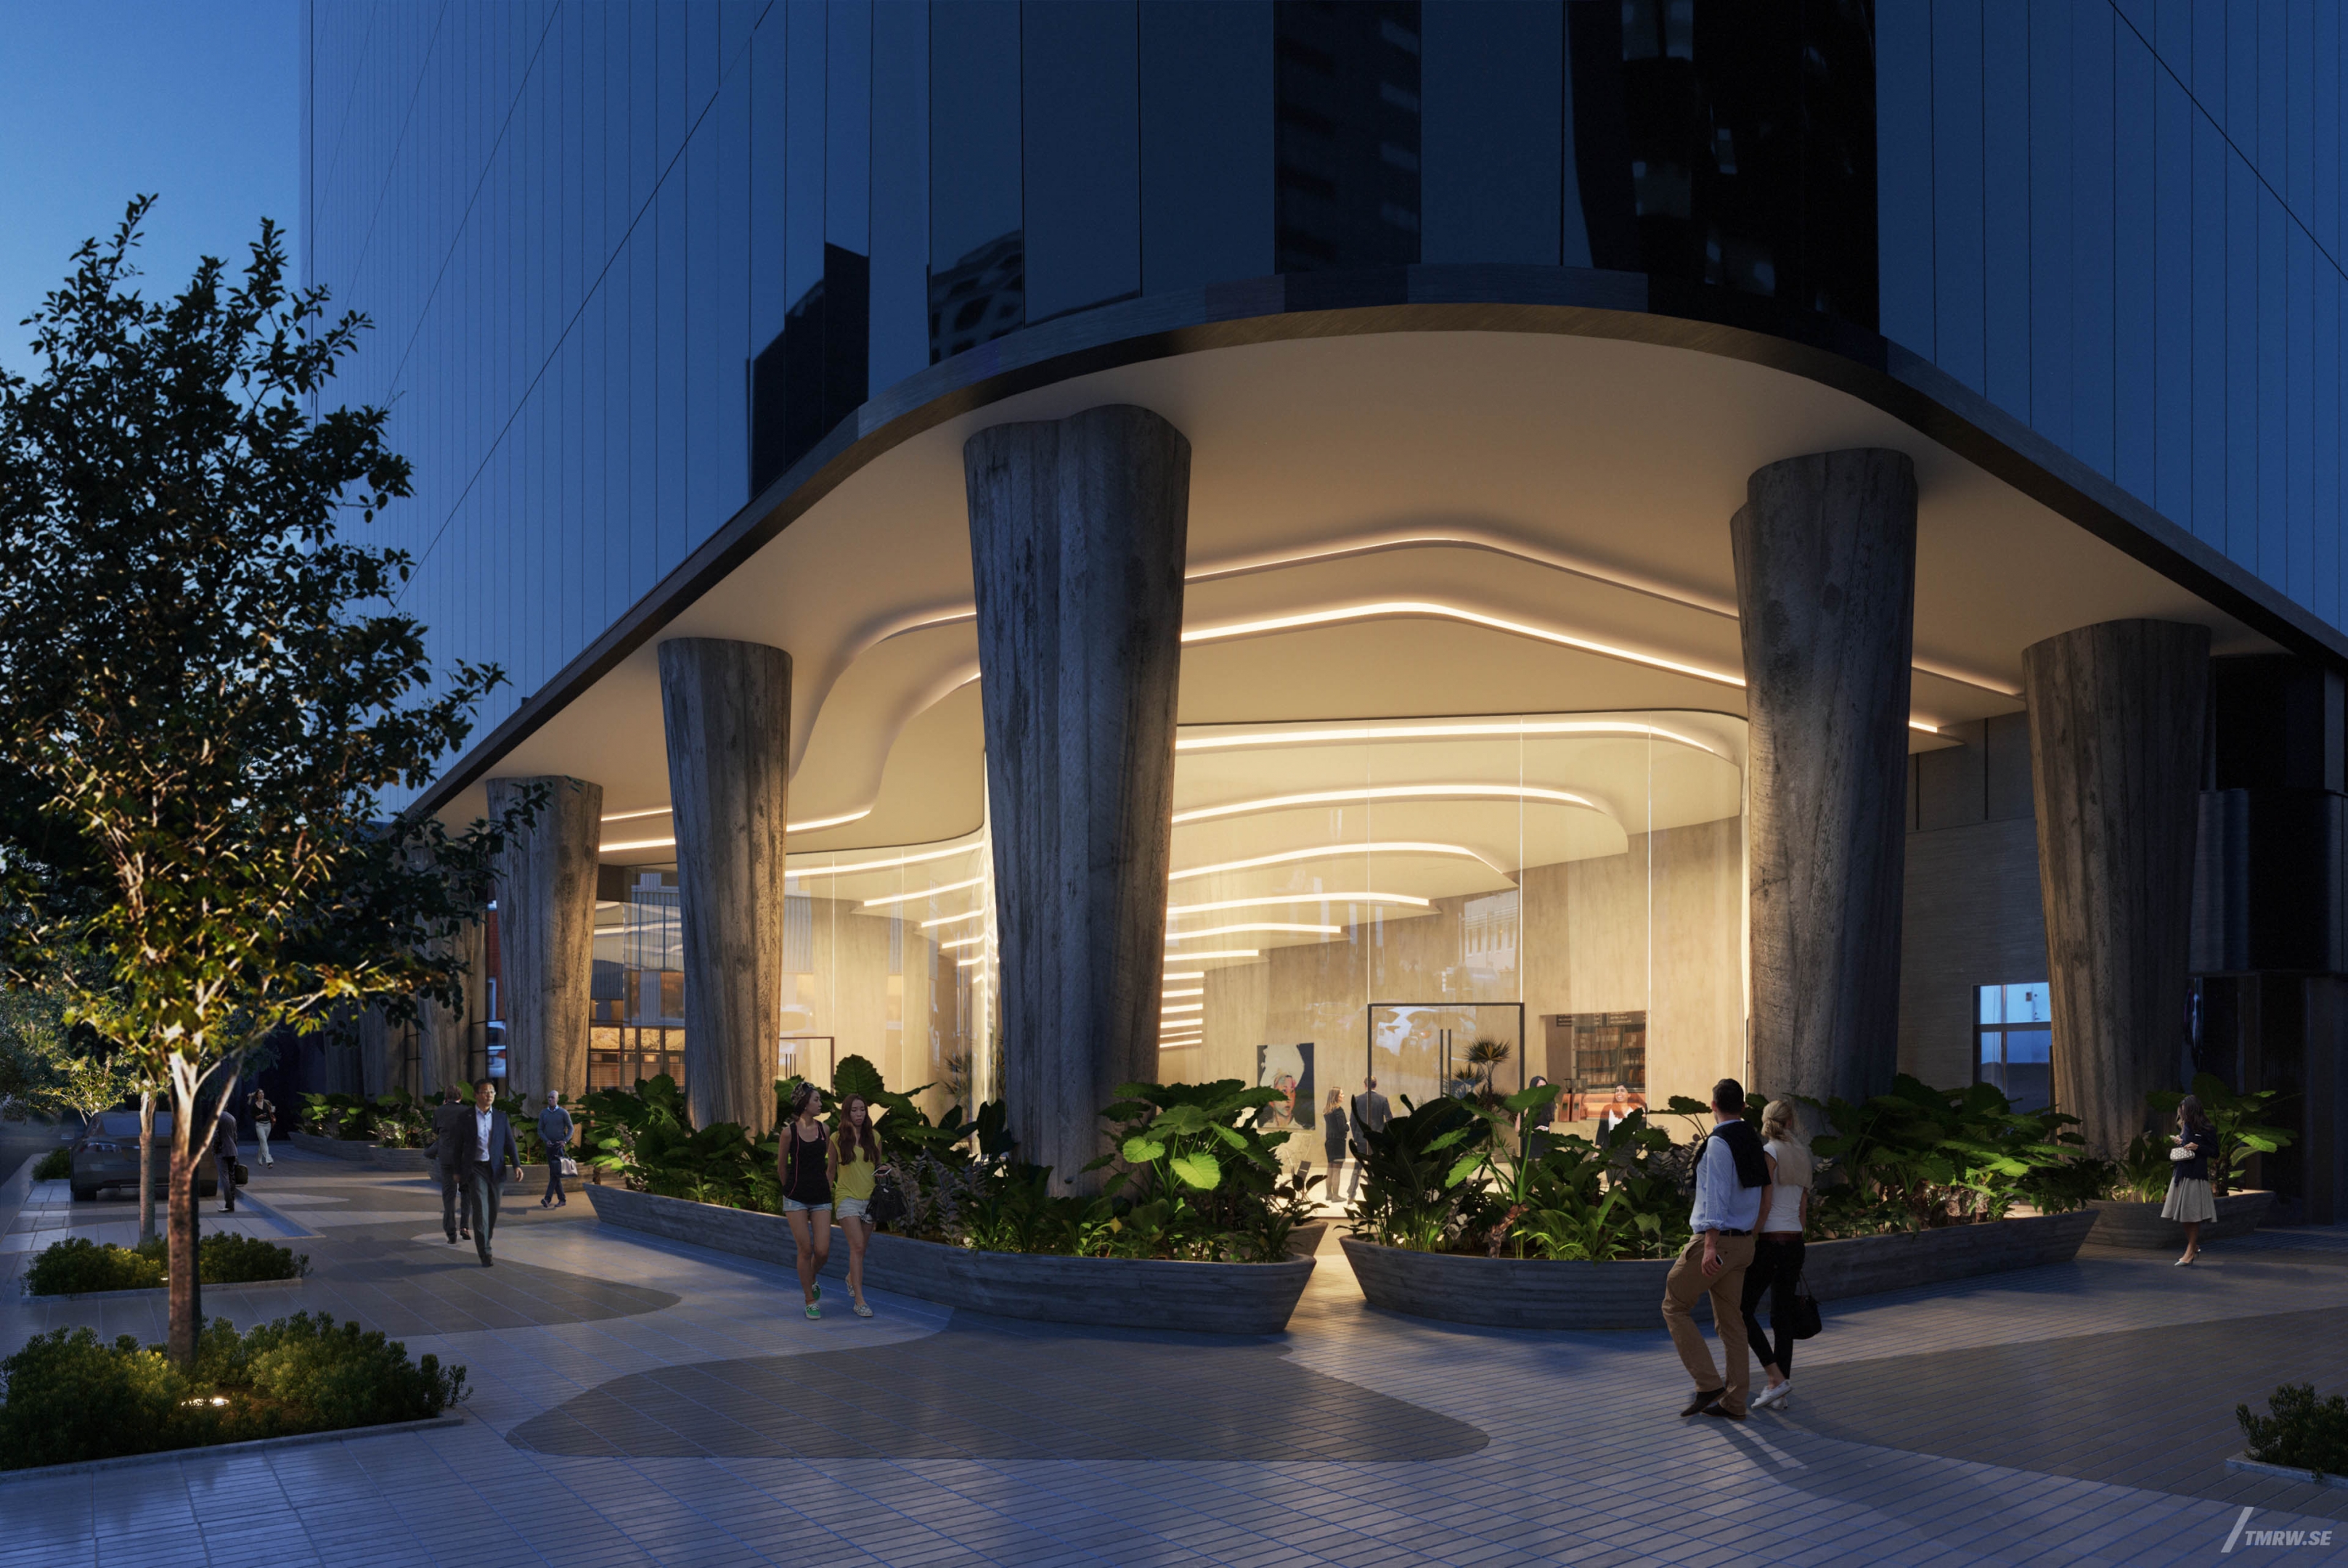 Architectural visualization of Tower 5C for Gensler, an entrance during night from a street view.